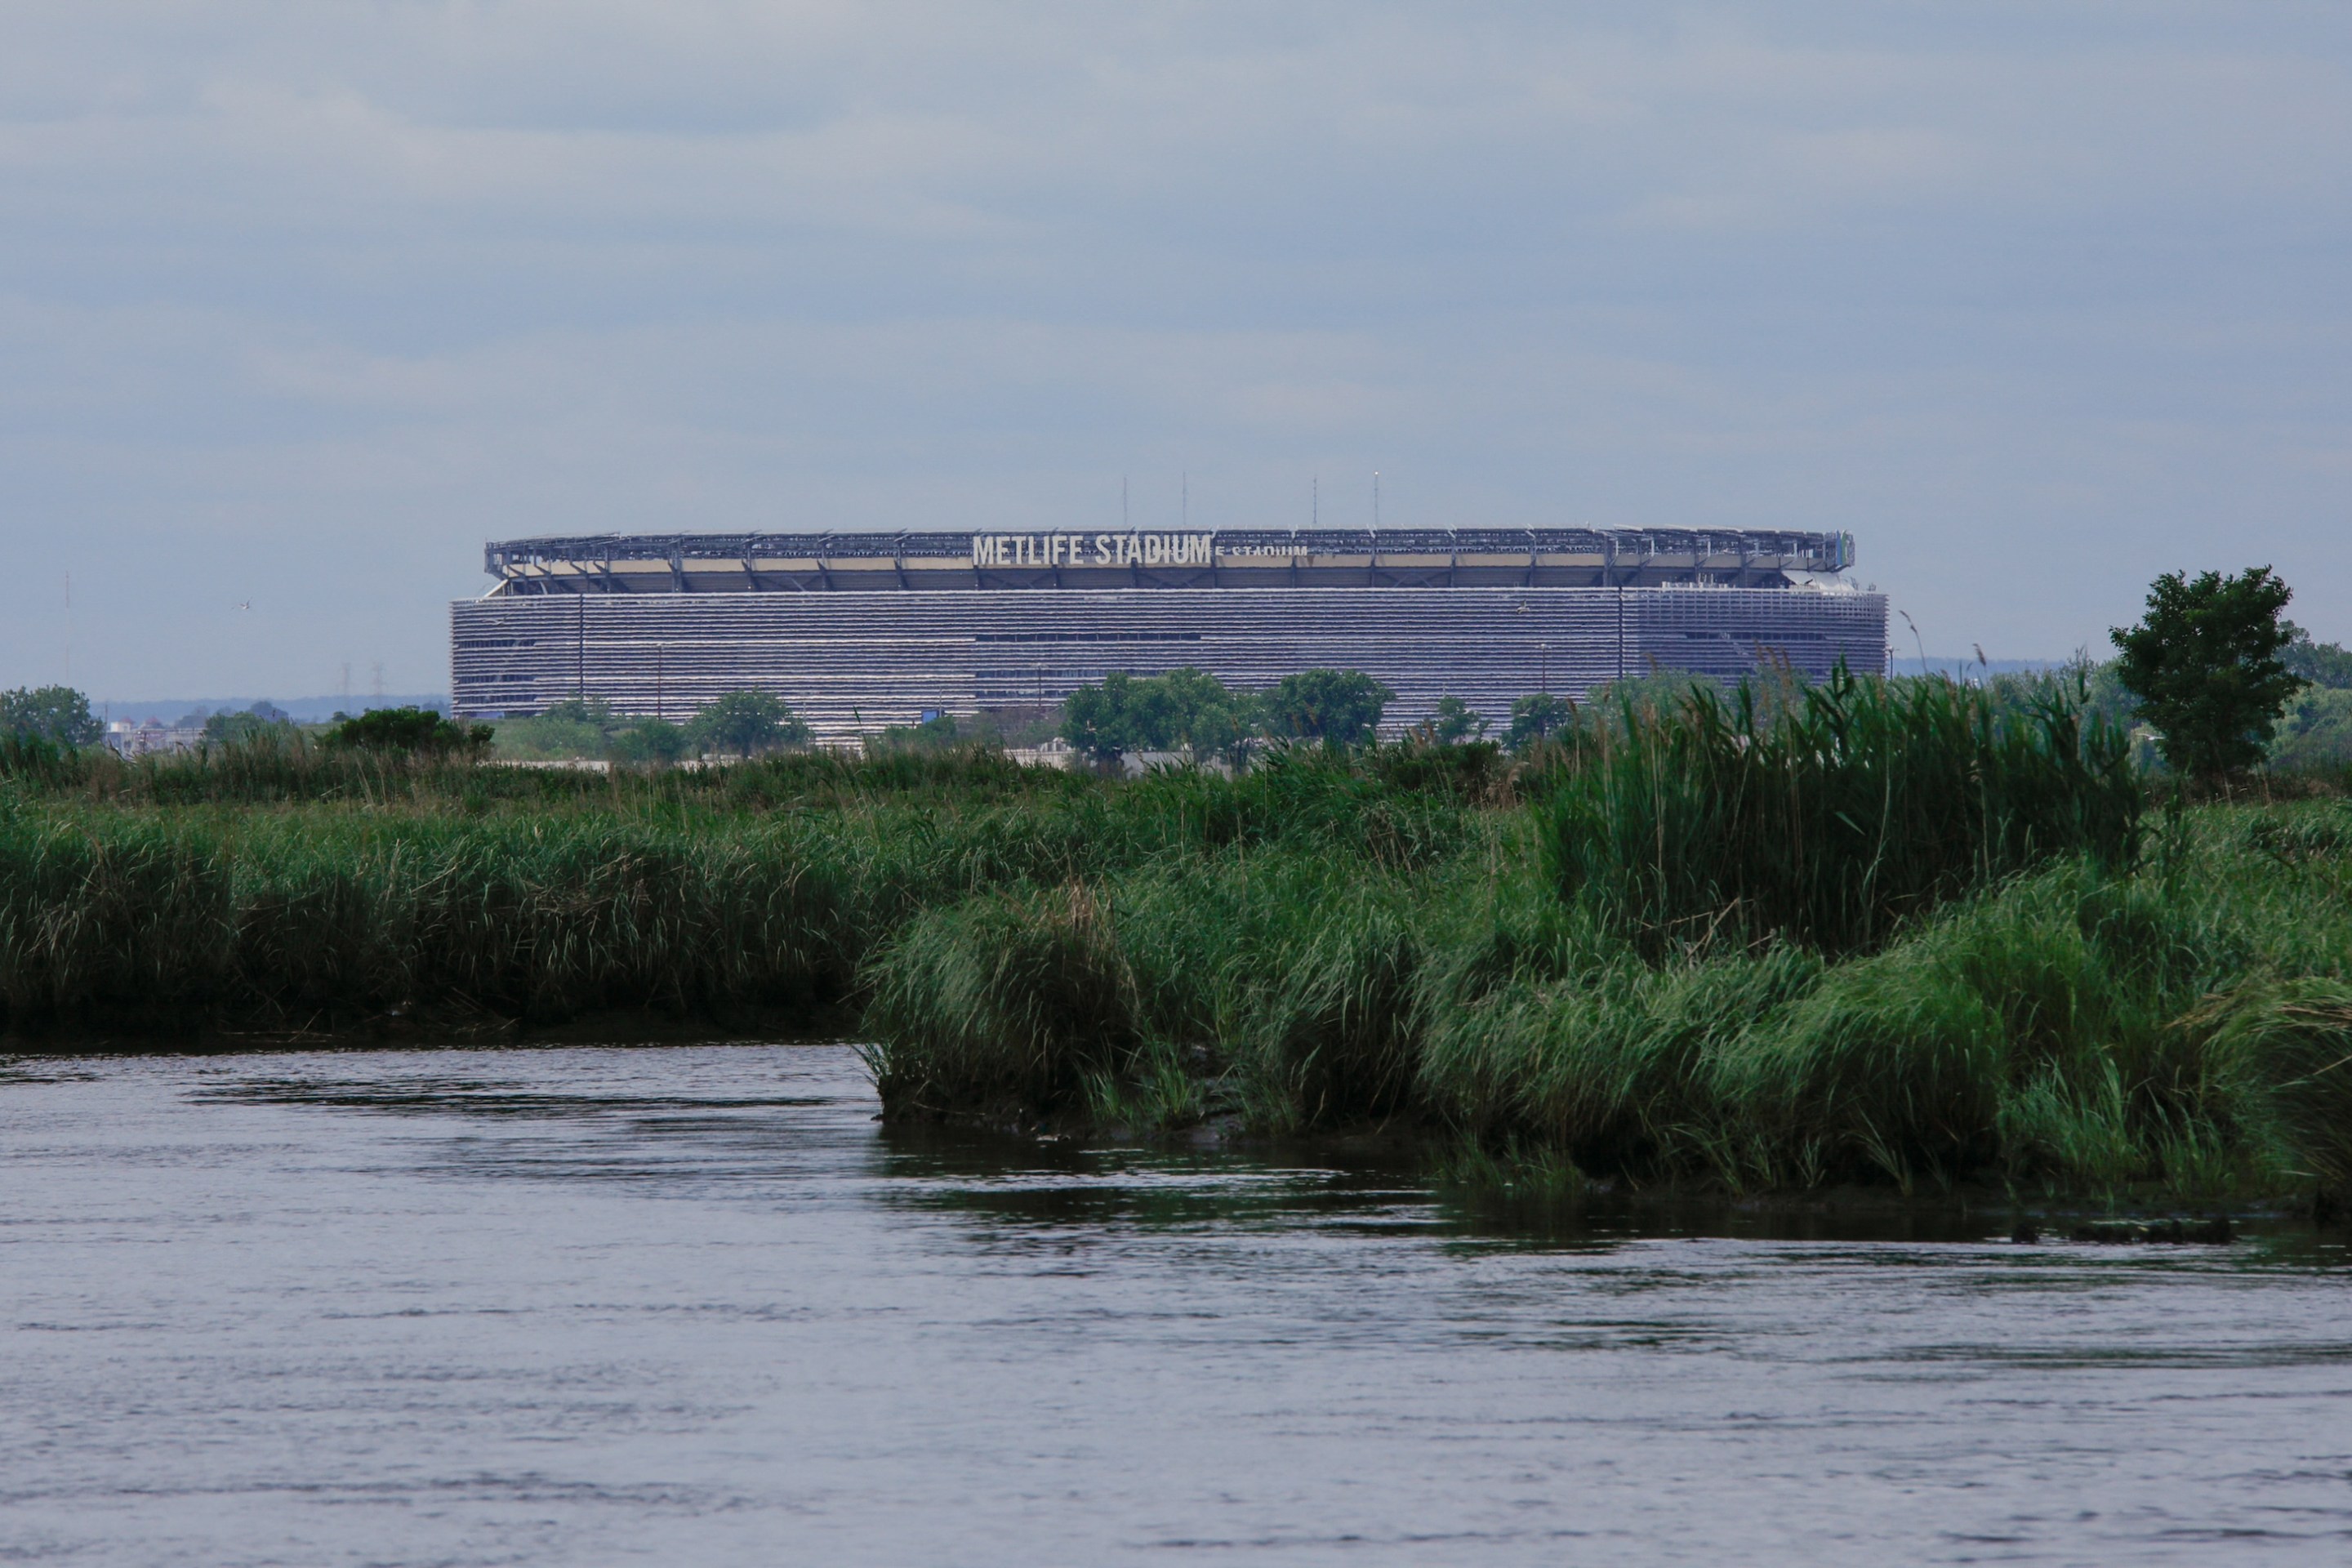 Metlife Stadium across the Hackensack River in Secaucus, New Jersey, on June 15, 2023. Activist Bill Sheehan has turned mountains to clean up the river, polluted by industry, ten kilometers (6.2 miles) from Manhattan, even if much remains to be done. "It didn't take me long to realize that the river needed a full-time advocate," he says of the hemmed in by an ultra-dense urban grid. (Photo by KENA BETANCUR / AFP) (Photo by KENA BETANCUR/AFP via Getty Images)